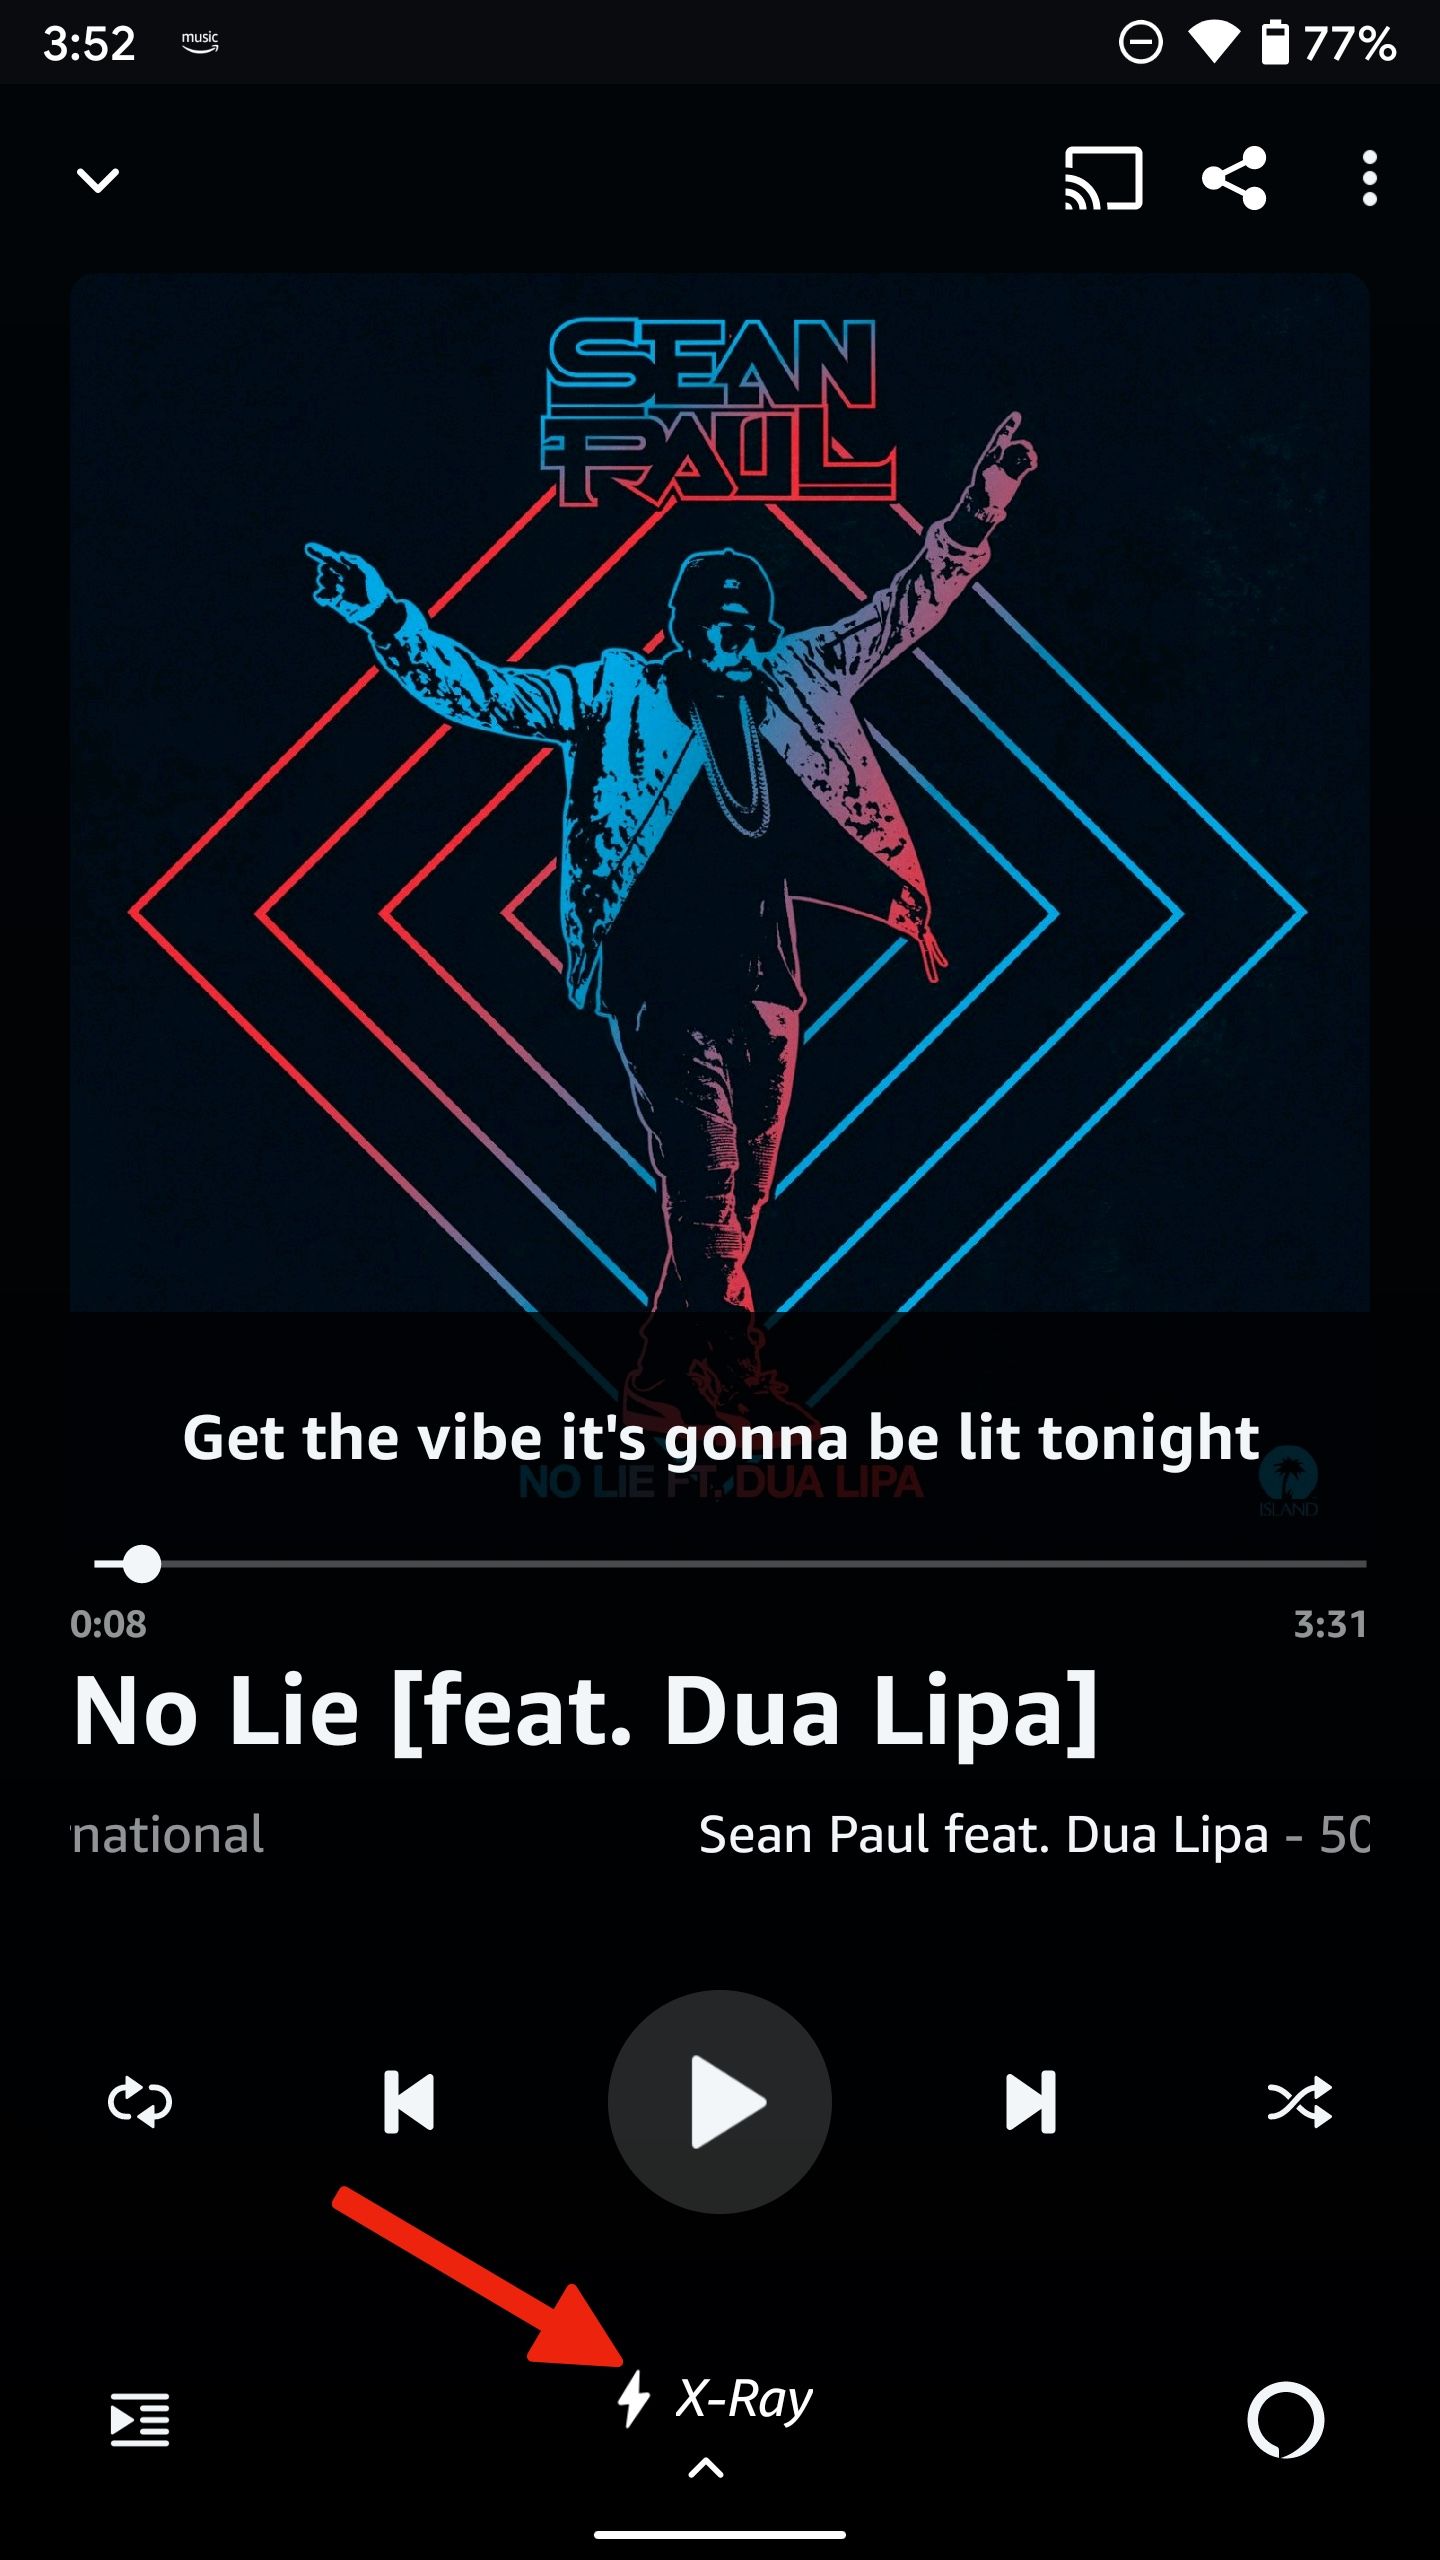 Shows the page for a specific song (No Lie) in the Amazon Music app with an arrow pointing to 'X-Ray' at the bottom.